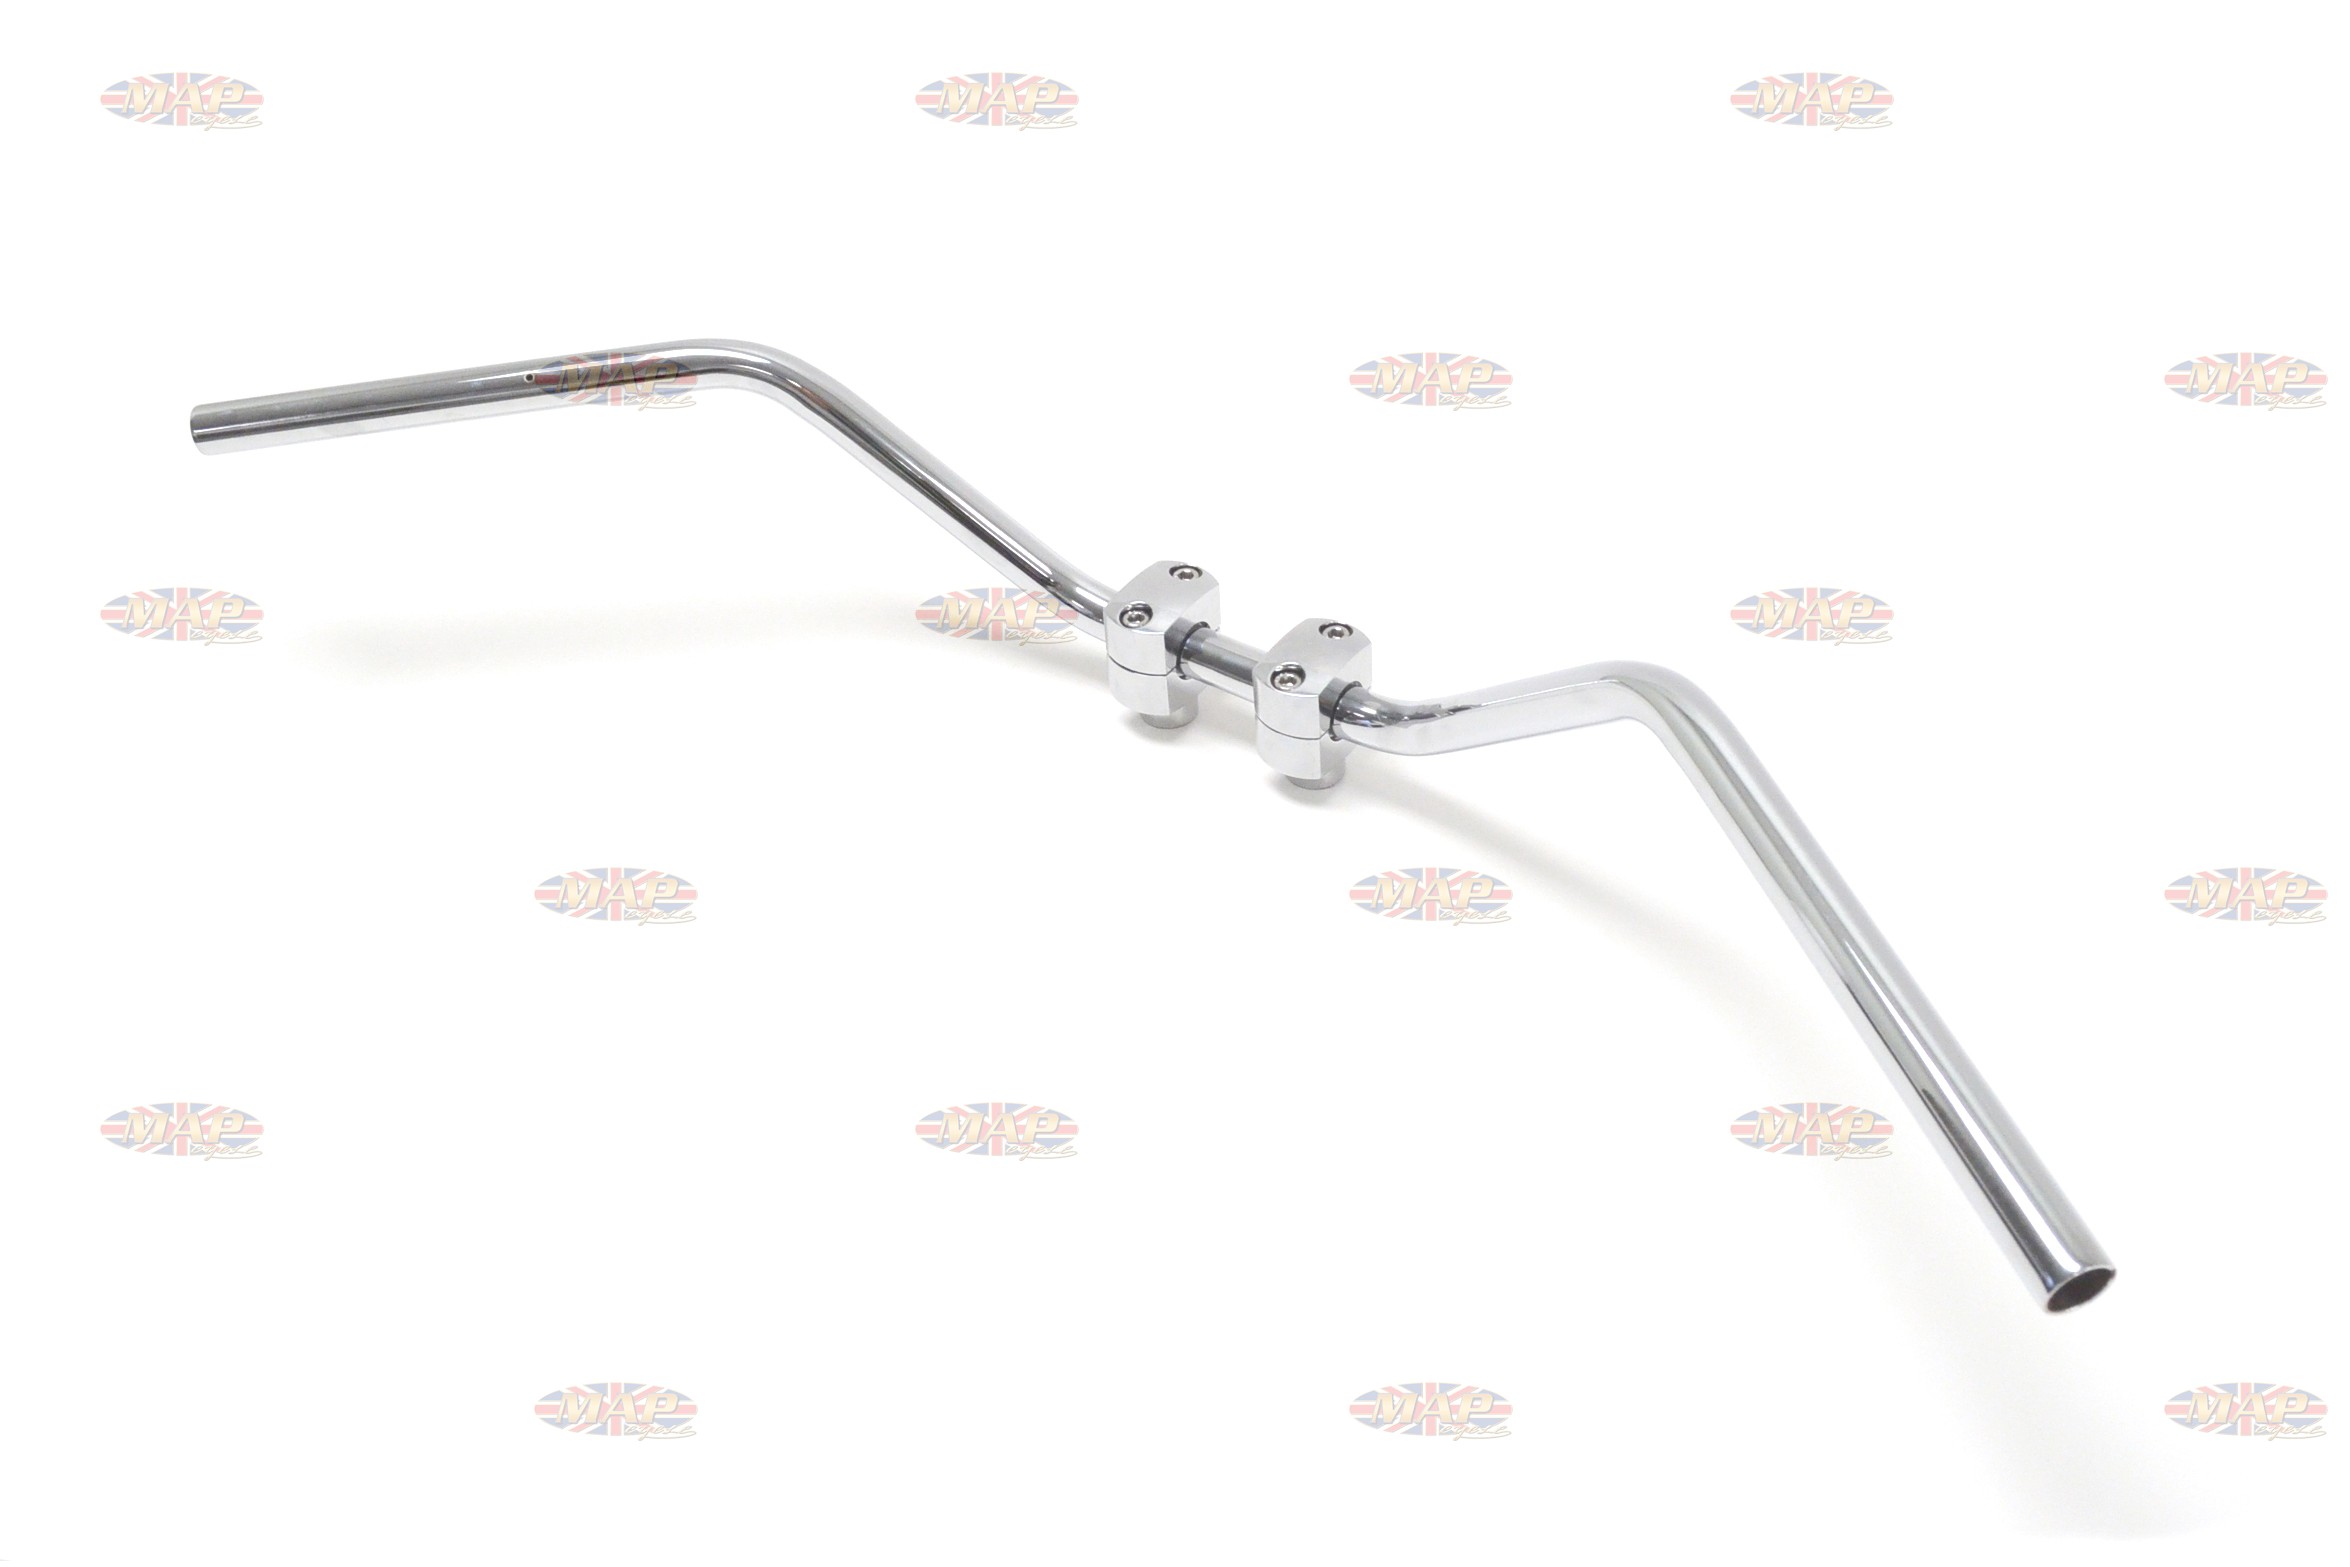 Triumph T120 TR6 Knurled and Drilled Handlebar 97-1870//E